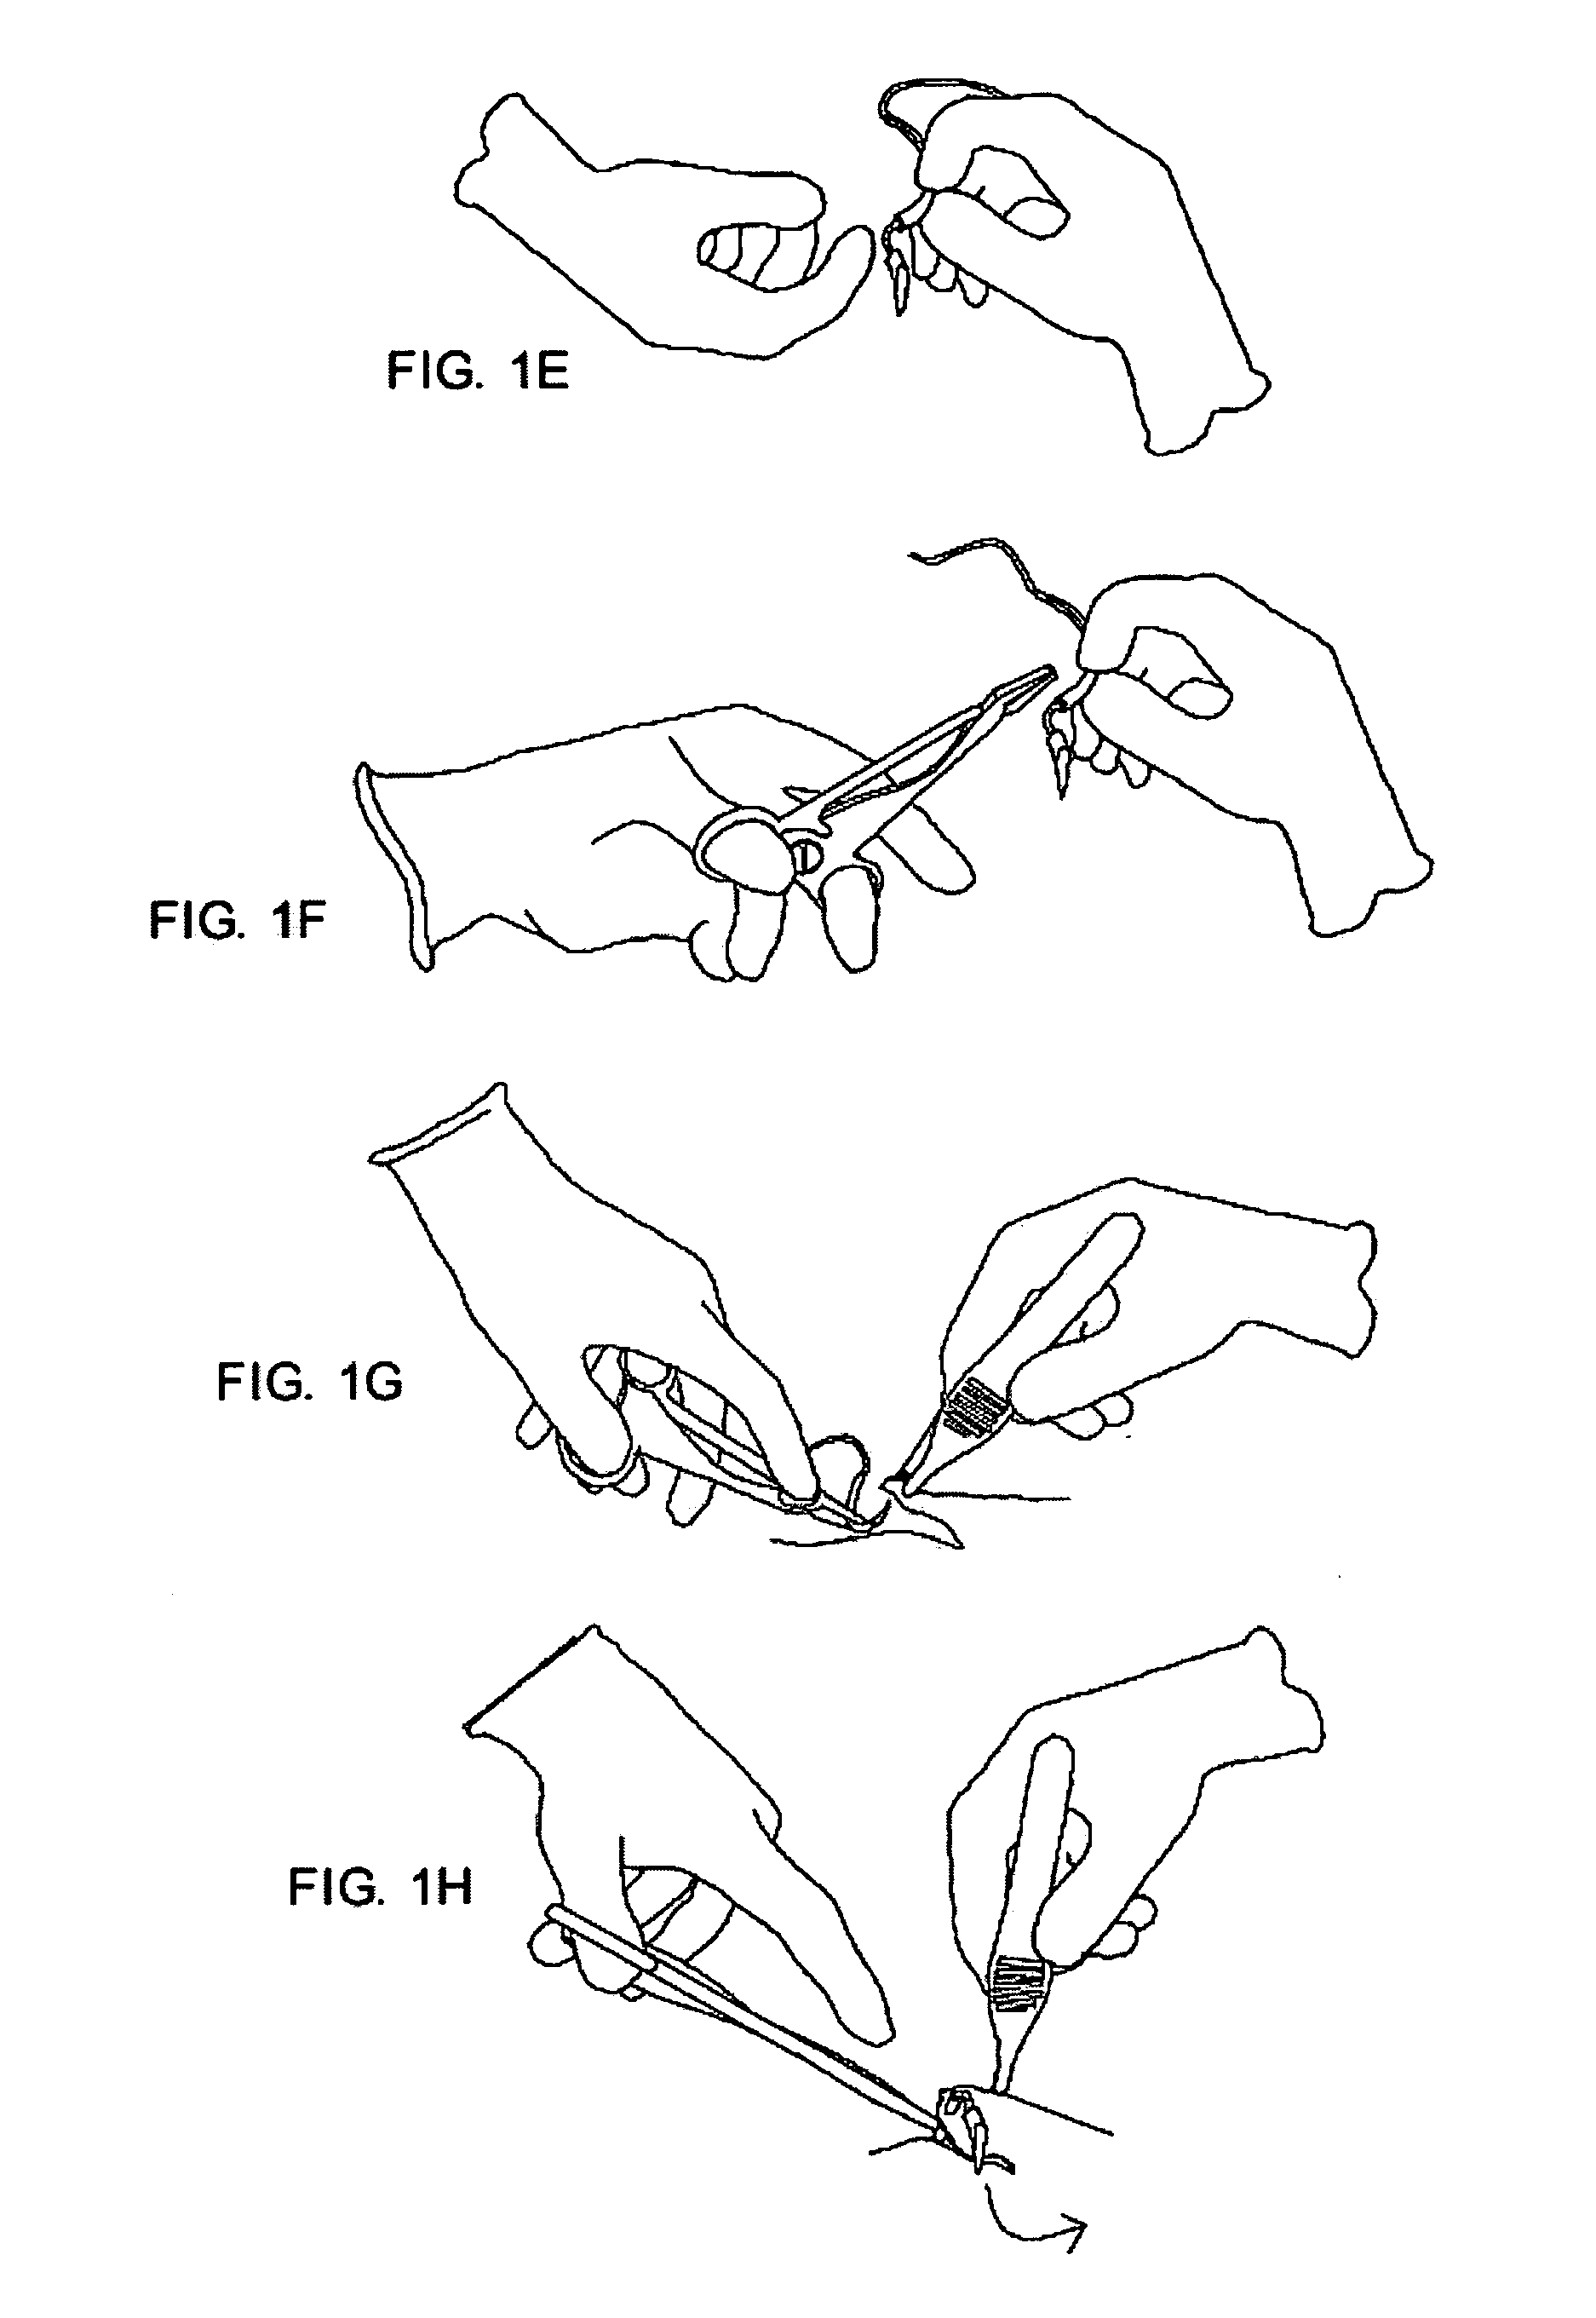 Safety suture needle assemblies and methods